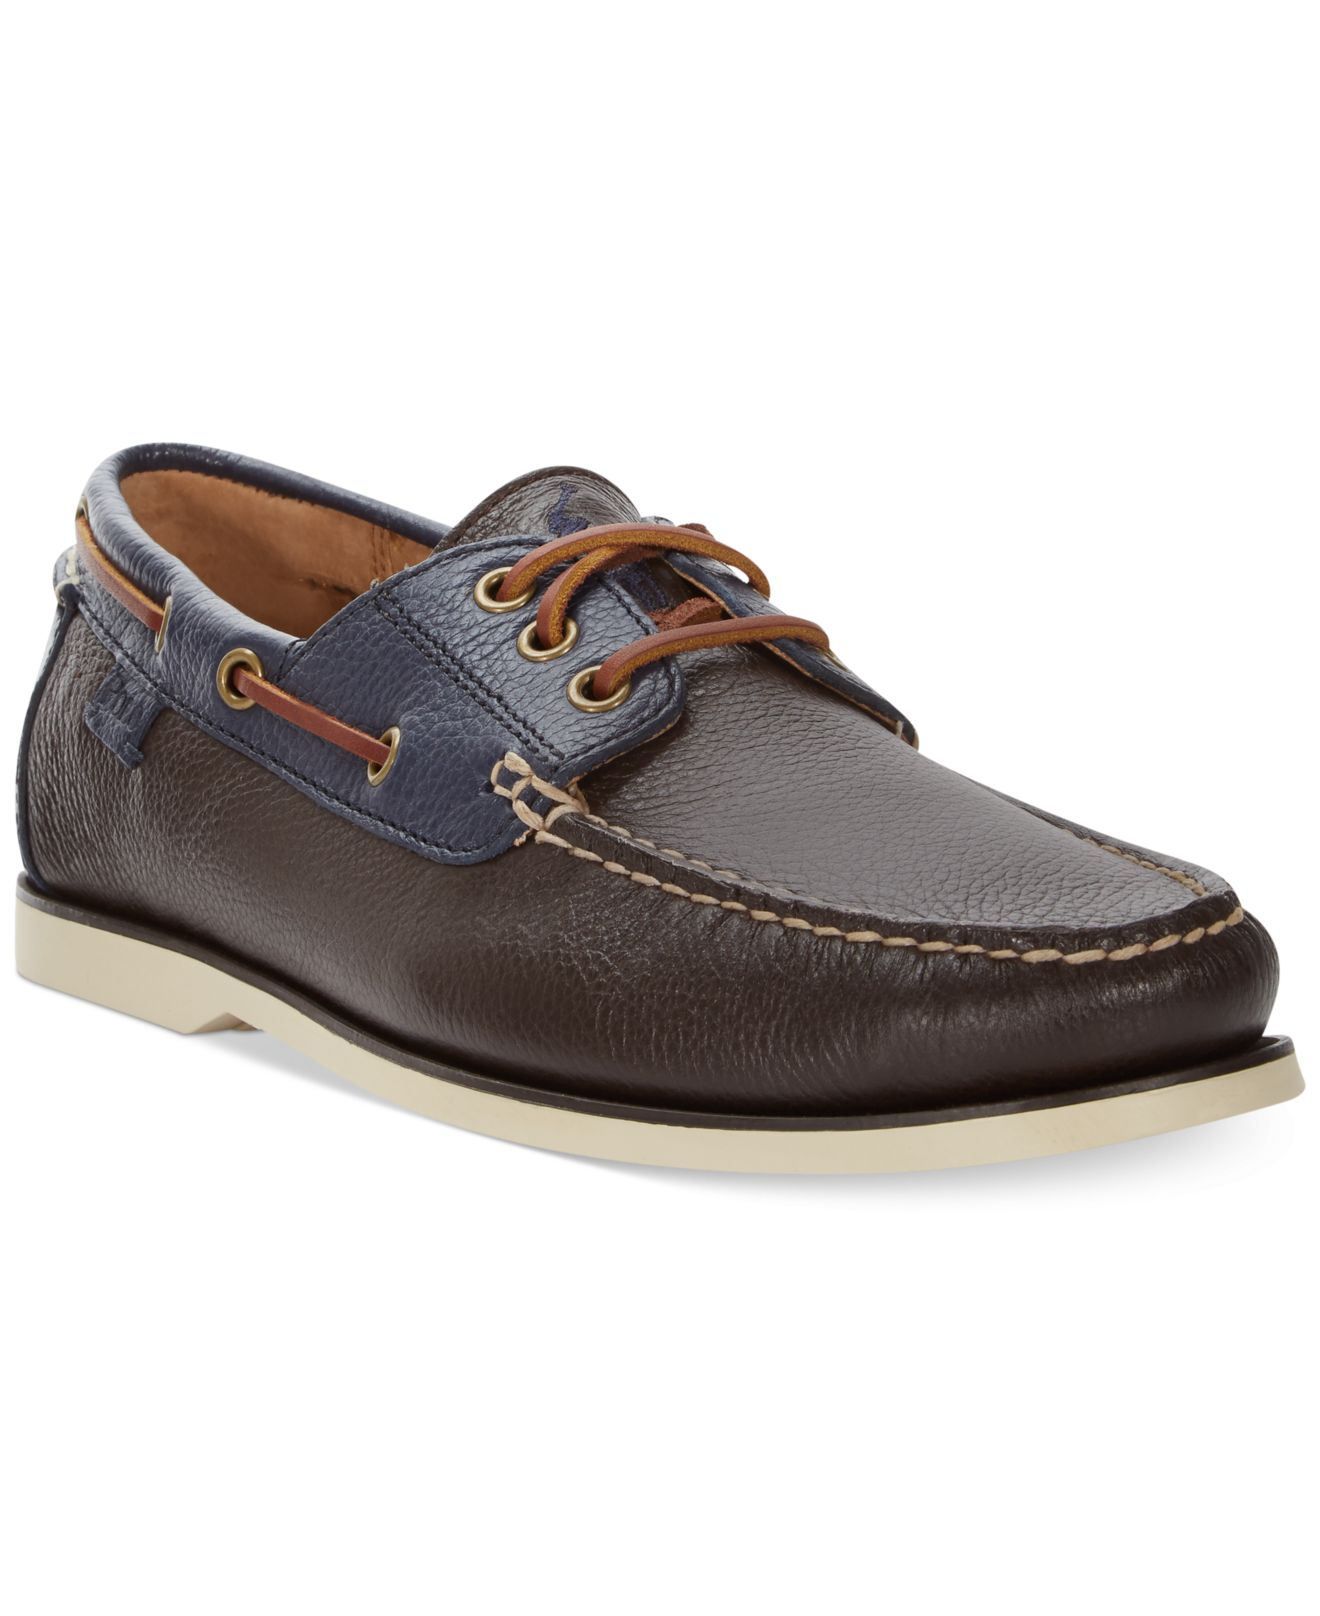 Polo Ralph Lauren Bienne Tumbled Leather Boat Shoes in